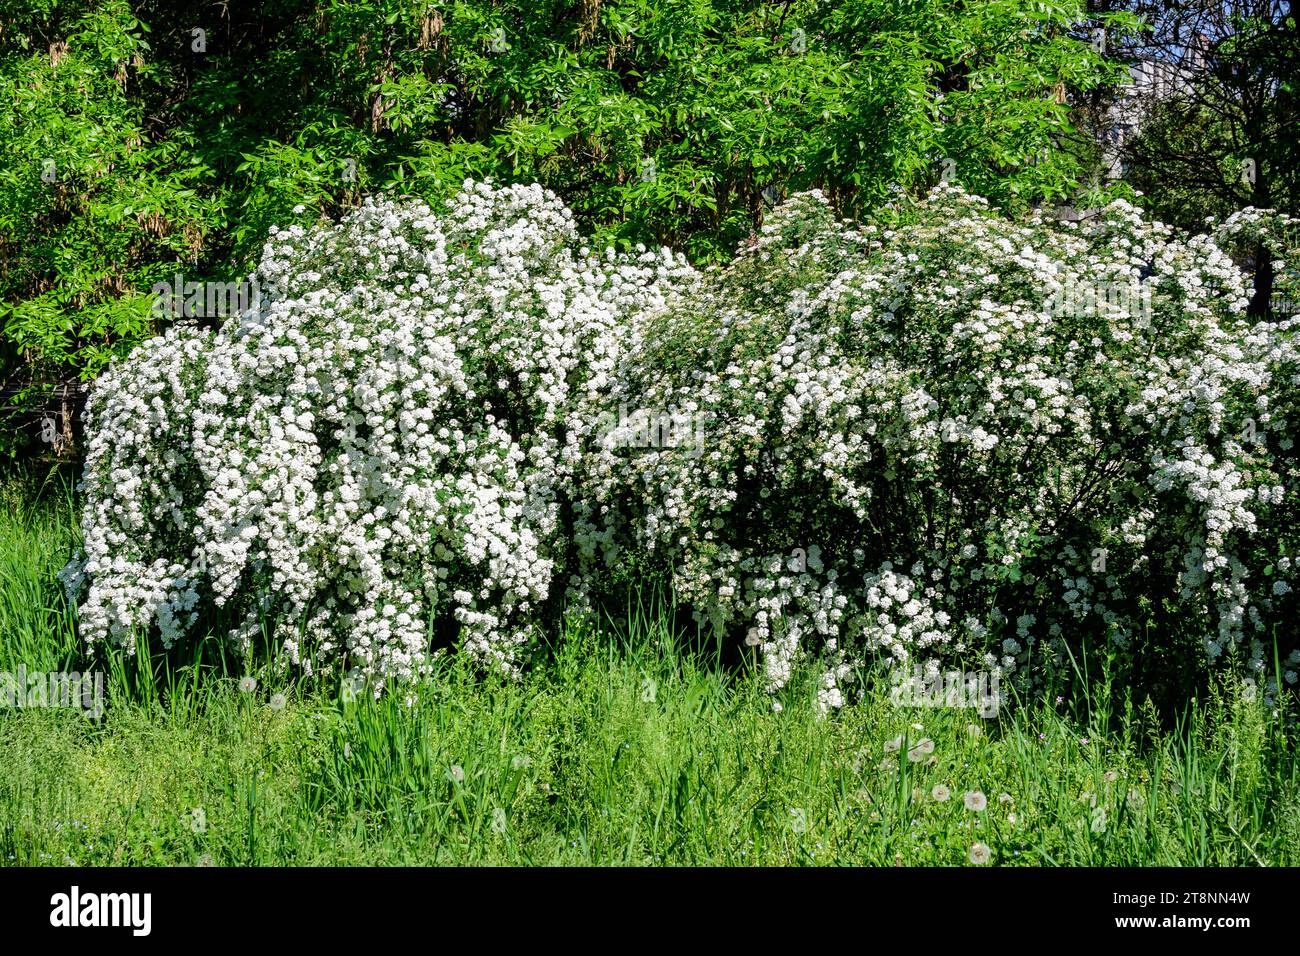 Large branch with delicate white flowers of Spiraea nipponica Snowmound shrub in full bloom and a small Green June Bug, beautiful outdoor floral backg Stock Photo